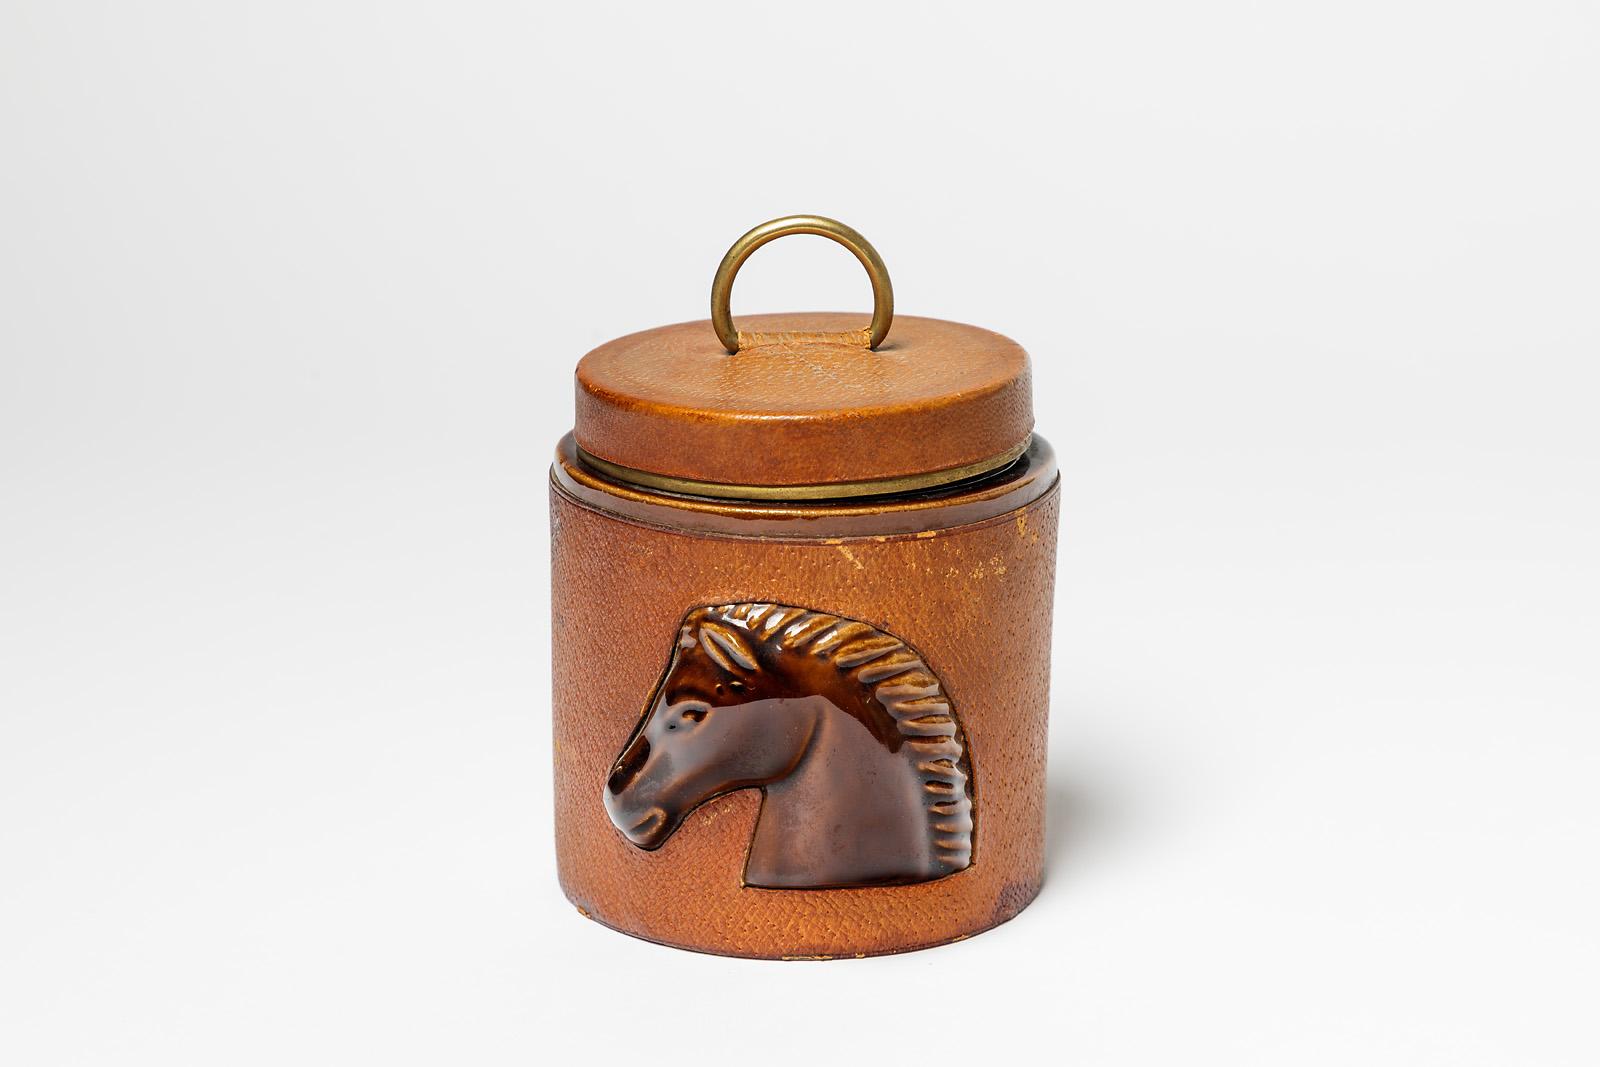 Longchamp

French leather and ceramic cigarette box by french luxury house

Original good condition, circa 1980

Signed under the base

Horse decoration

Measures: Height closed : 11 cm large : 10 cm.